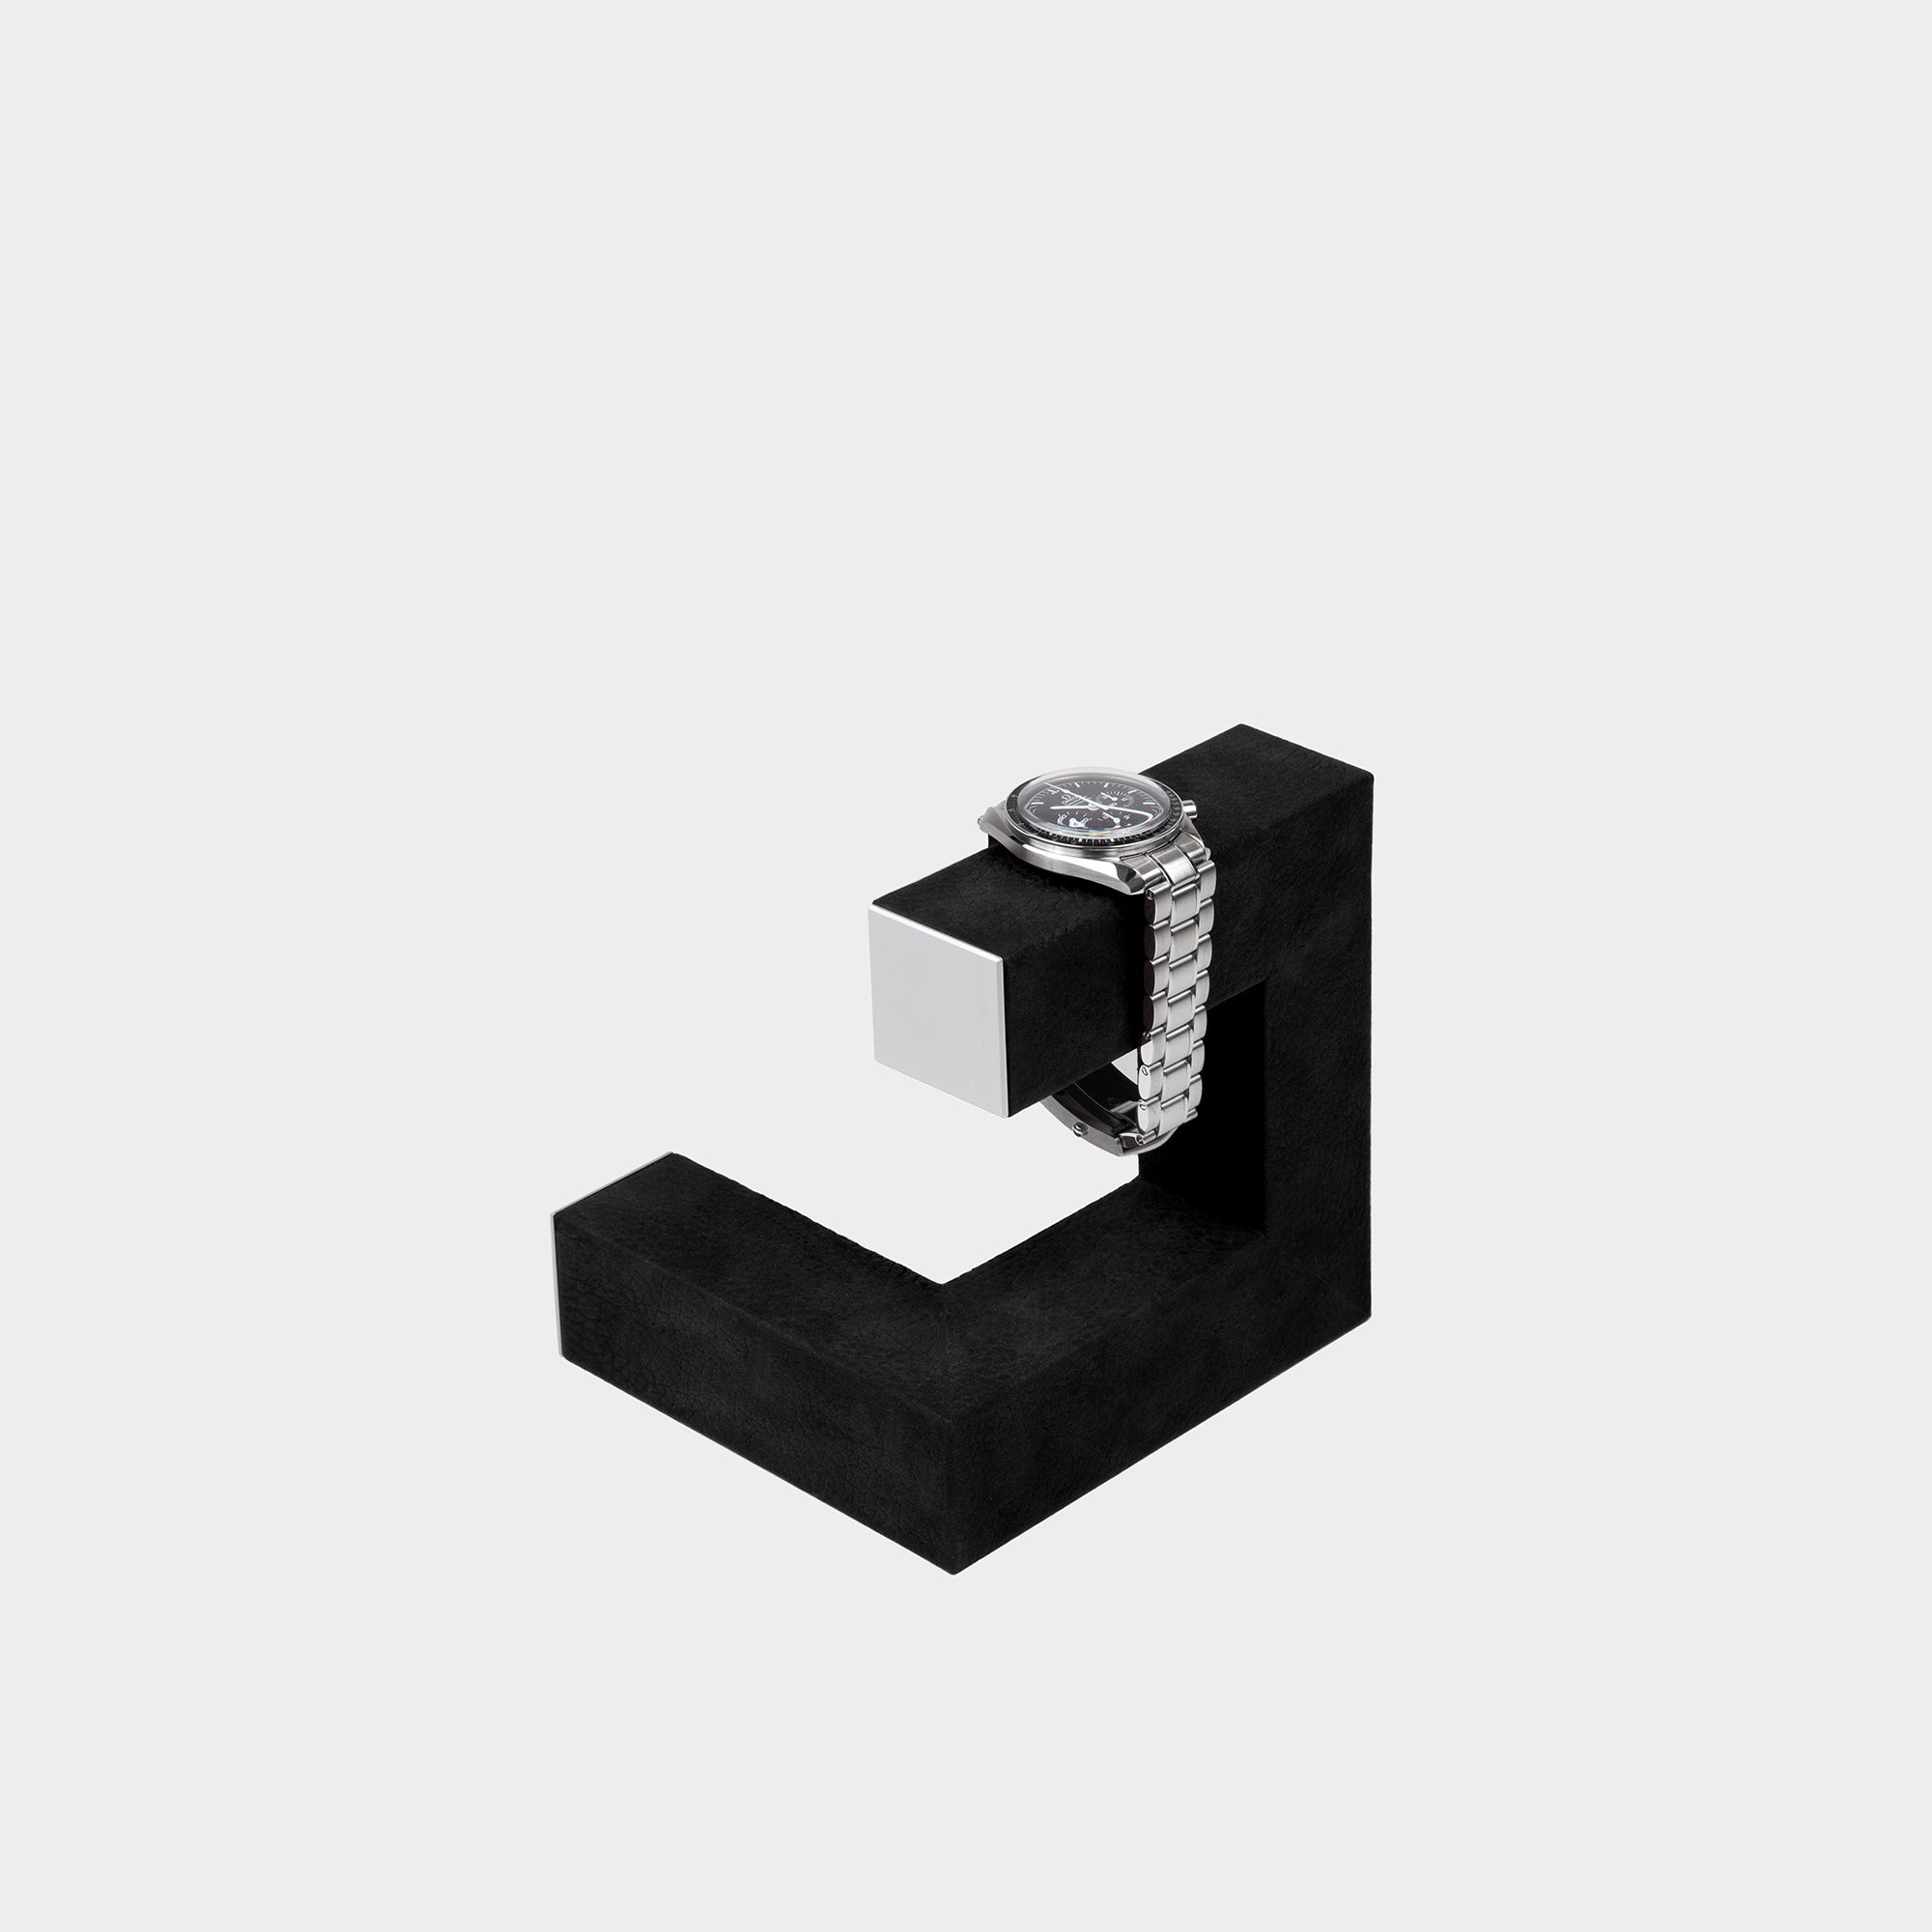 Charles Simon Hudson 1 watch stand in black